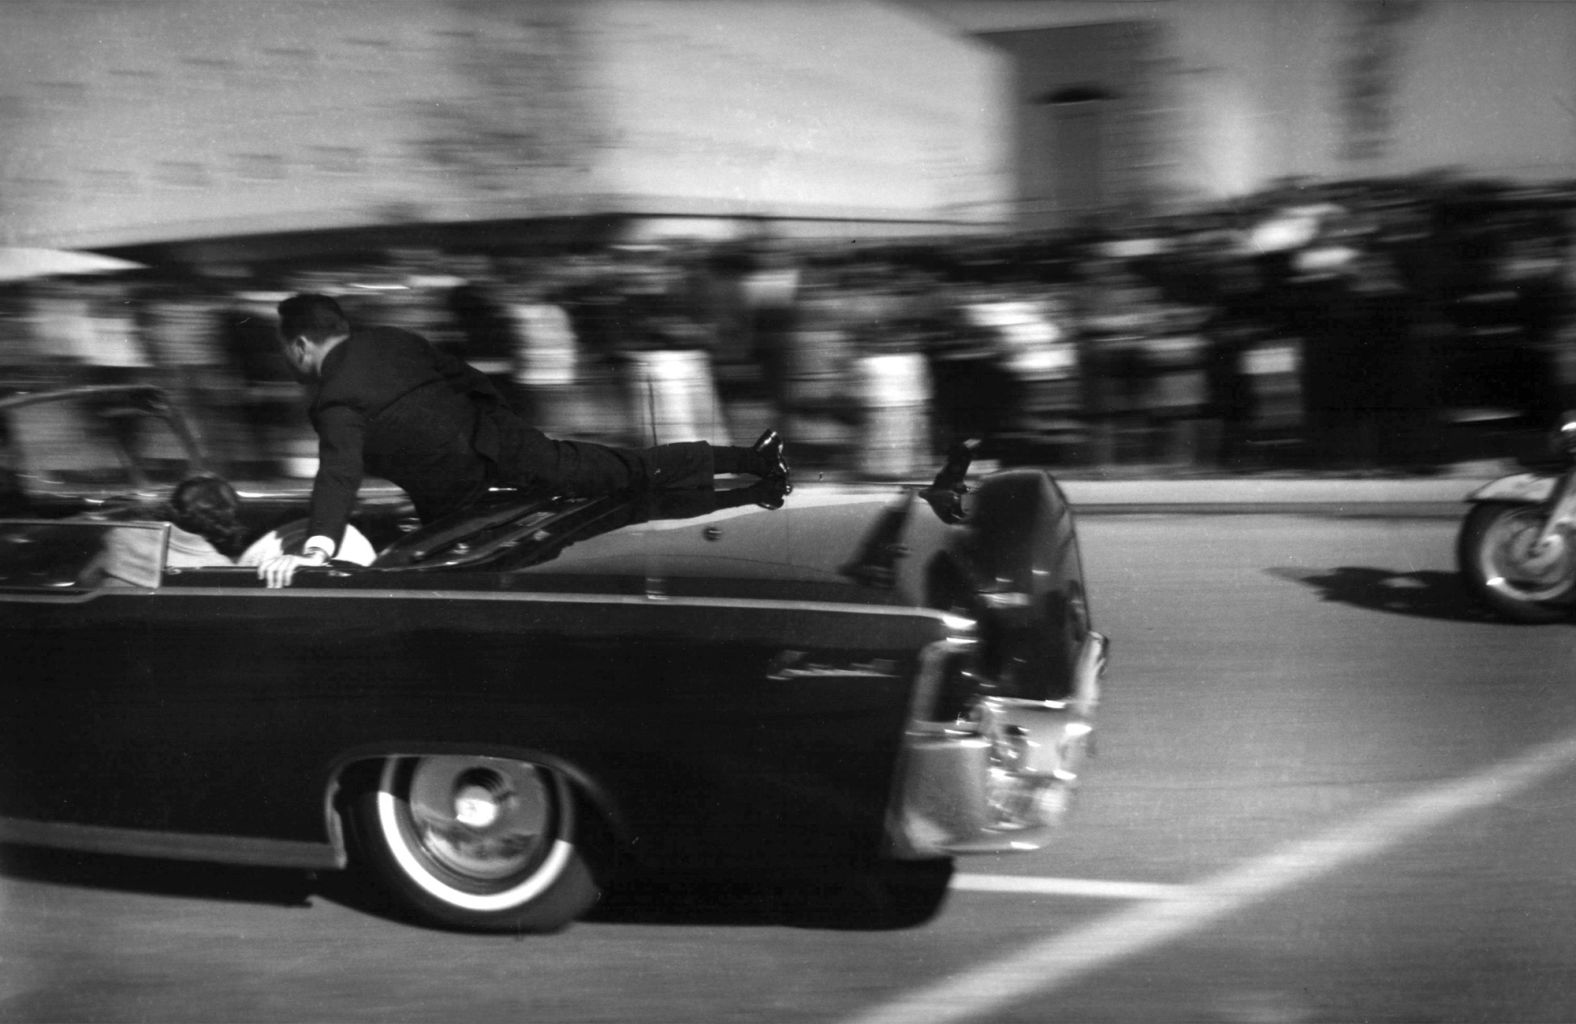 The limousine carrying the mortally wounded president races toward the hospital seconds after the shots were fired. Here, Secret Service agent Clint Hill rides on the back of the car as the wives cover their stricken husbands.